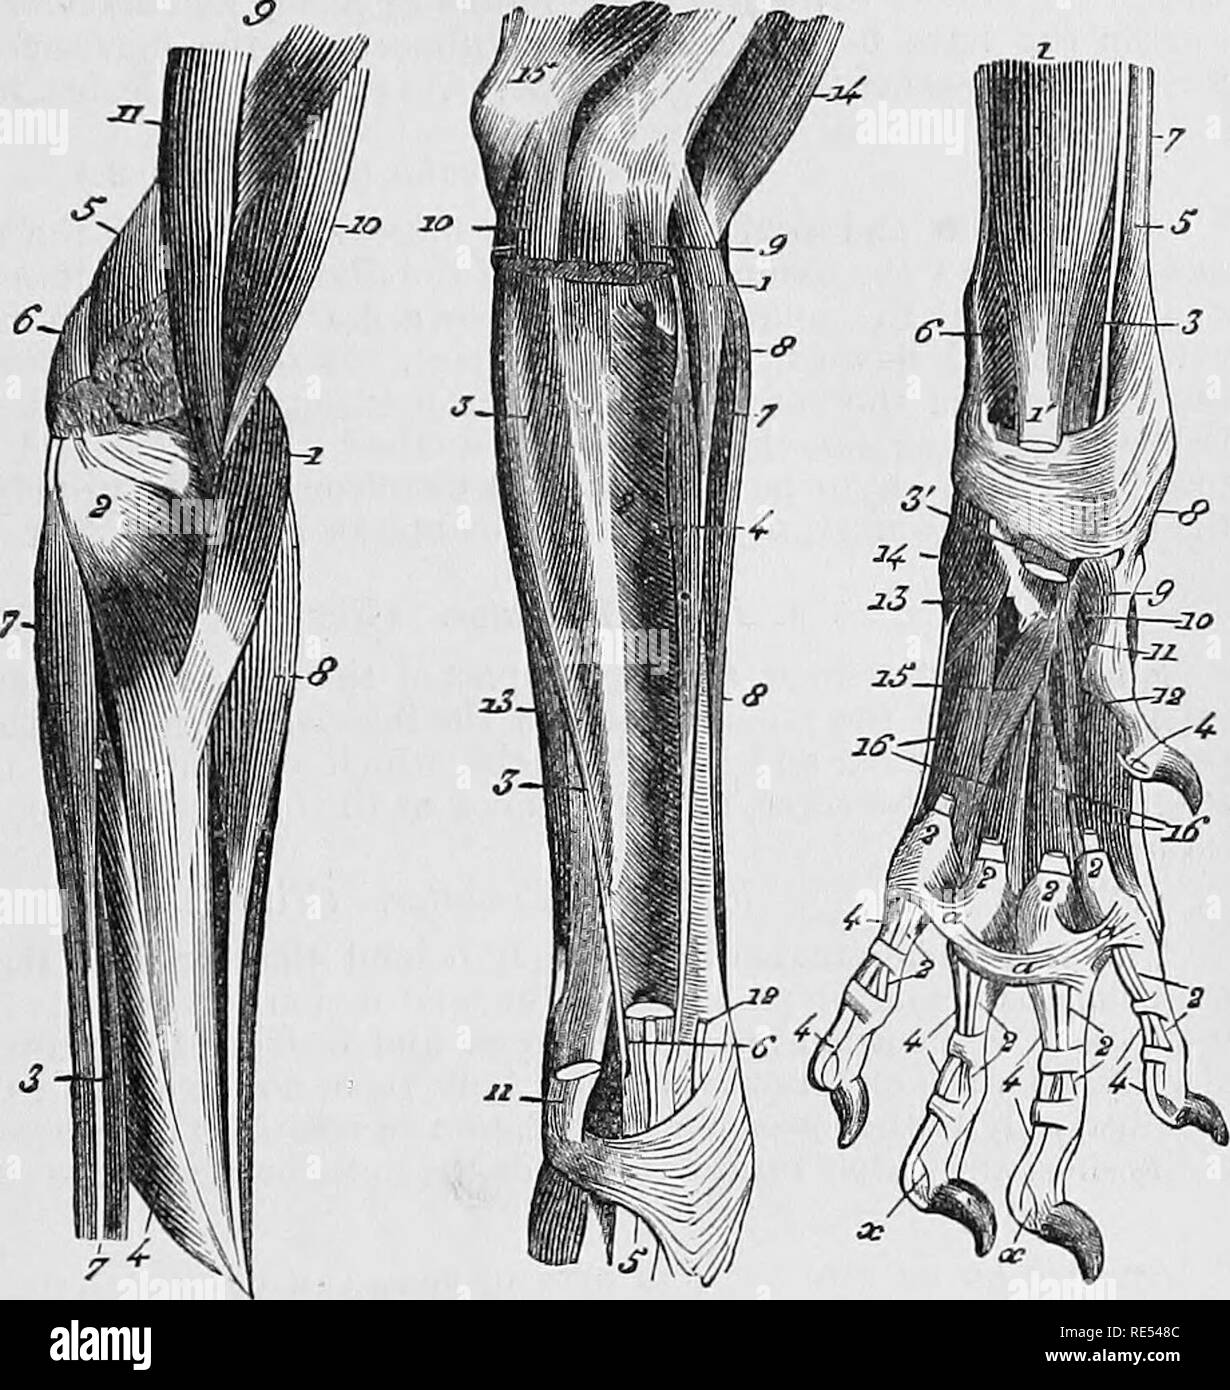 . The comparative anatomy of the domesticated animals. Veterinary anatomy. MUSCLES OF TSE ANTERIOR LIMBS. Fig. 125. B. C. 273. MtrSOLES OP THE POEE-AEM AND PAW OF THE DOS. A. Anterior superficial region.—1, Short flexor of the fore-arm (anterior brachial); 2, Long flexor of the fore-arm (bi-achial biceps); 3, Anconeus ; 4, Round pronator; 5, Anterior extensor of the metacarpus (exterual radial); 6, Its tendon of inser- tion, destined for the fourth metacarpal bone; 7, That which goes to the third; 8, External oblique of the metacarpus (long abductor and short extensor of the thumb) ; 9, Common Stock Photo